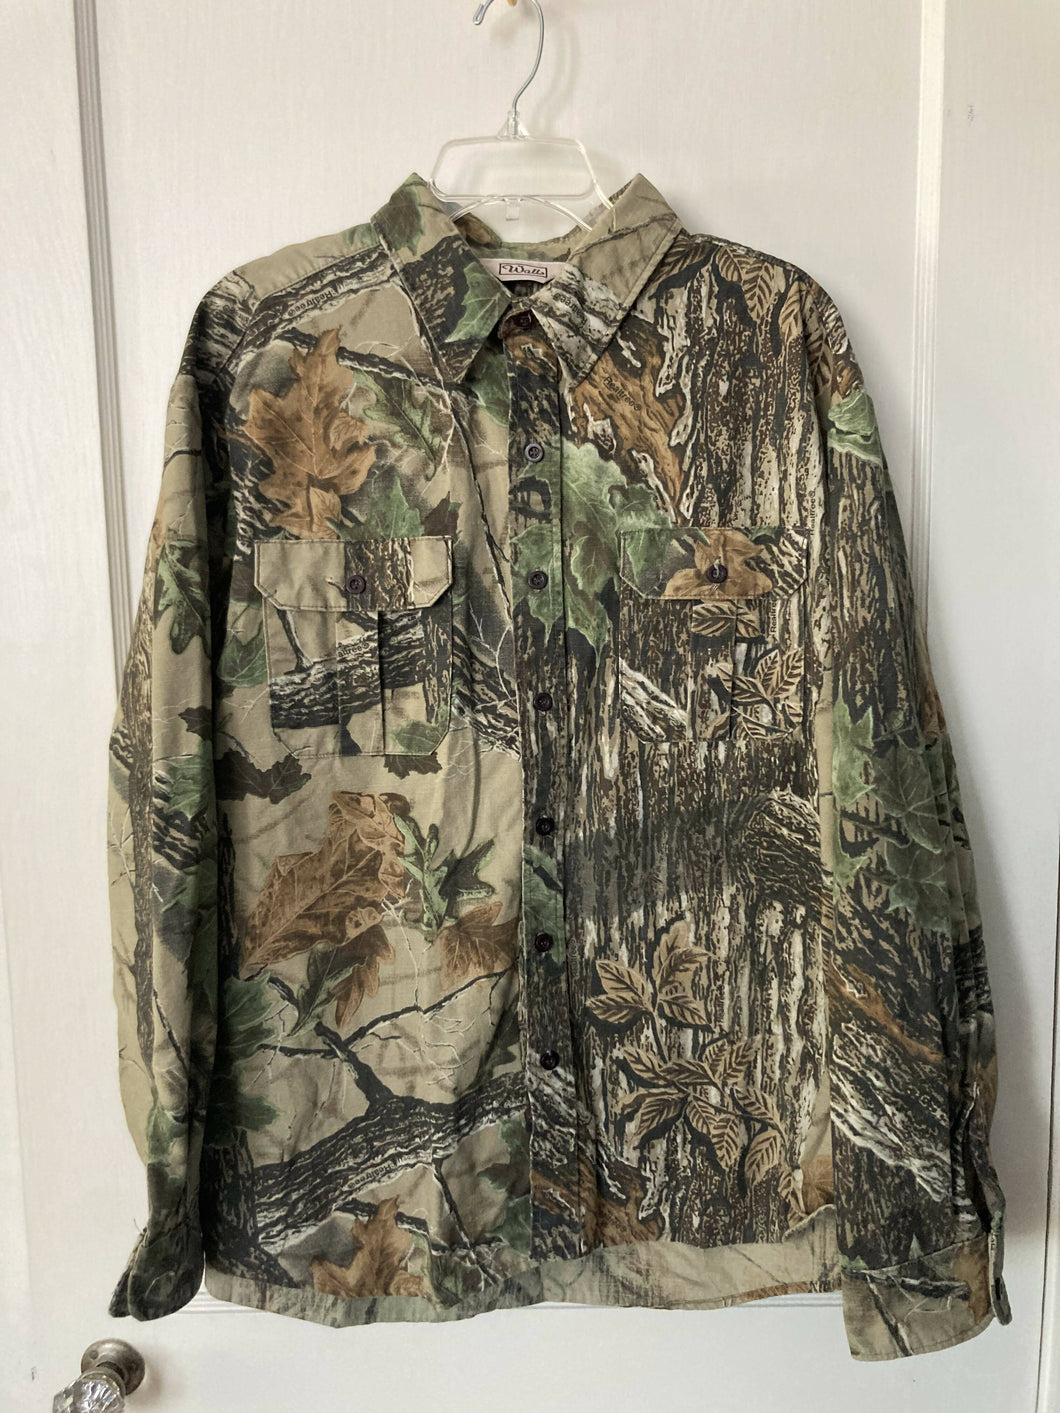 Vintage Walls Realtree Camouflage Button Up Shirt Size XL Made in